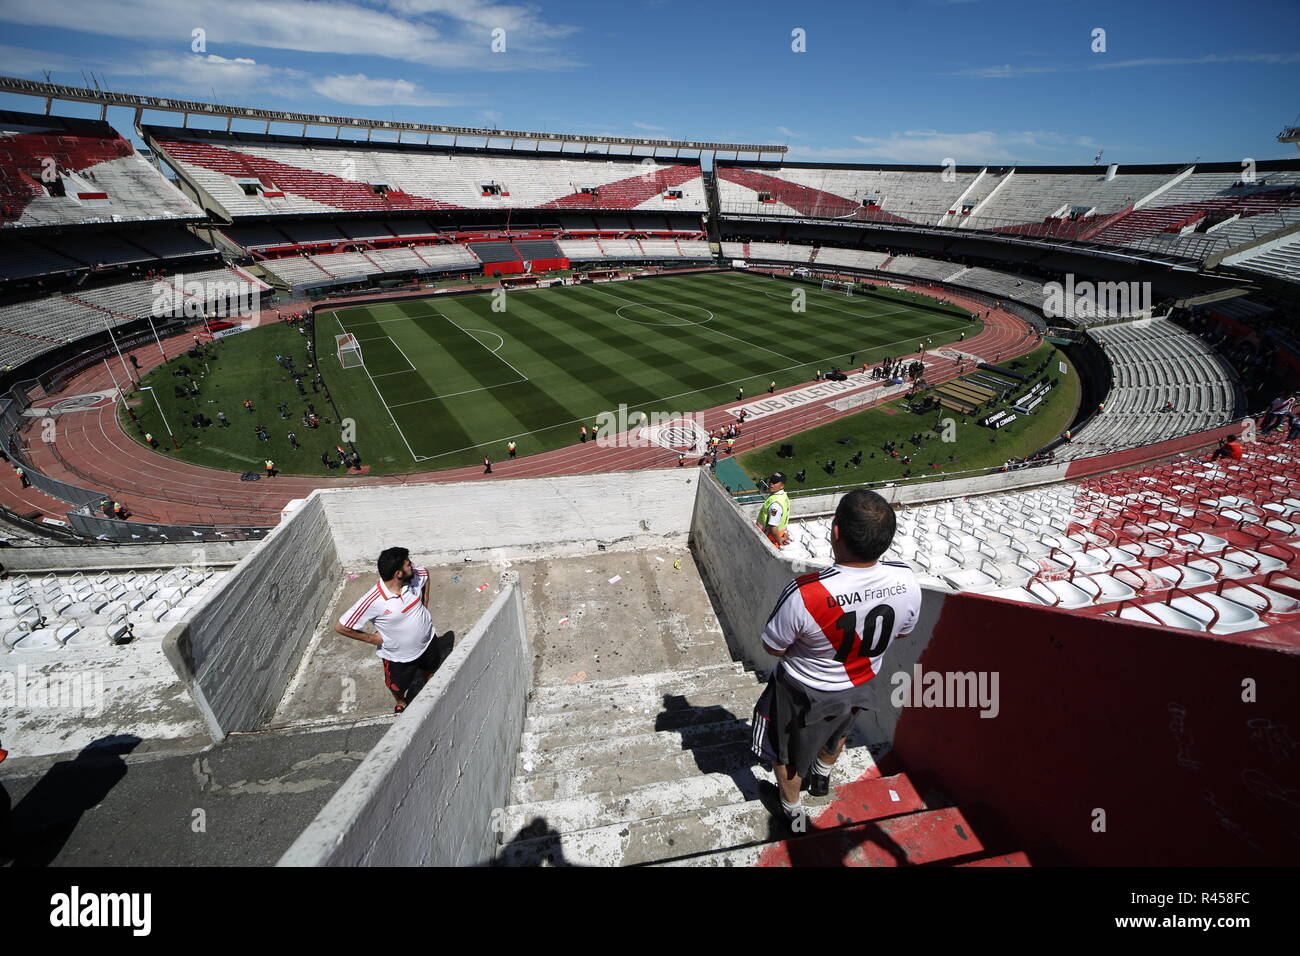 Buenos Aires, Argentina. 25th Nov, 2018. Soccer: South America, final Copa de Libertadores: River Plate - Boca Juniors, return match. Fans of River Plate are looking at the empty football field. The Copa Libertadores final between Argentinian rivals River Plate and Boca Juniors has once again been postponed. The match in Buenos Aires was postponed to an unspecified date at the request of Boca Juniors after the serious riots. Credit: Gustavo Ortiz/dpa/Alamy Live News Stock Photo